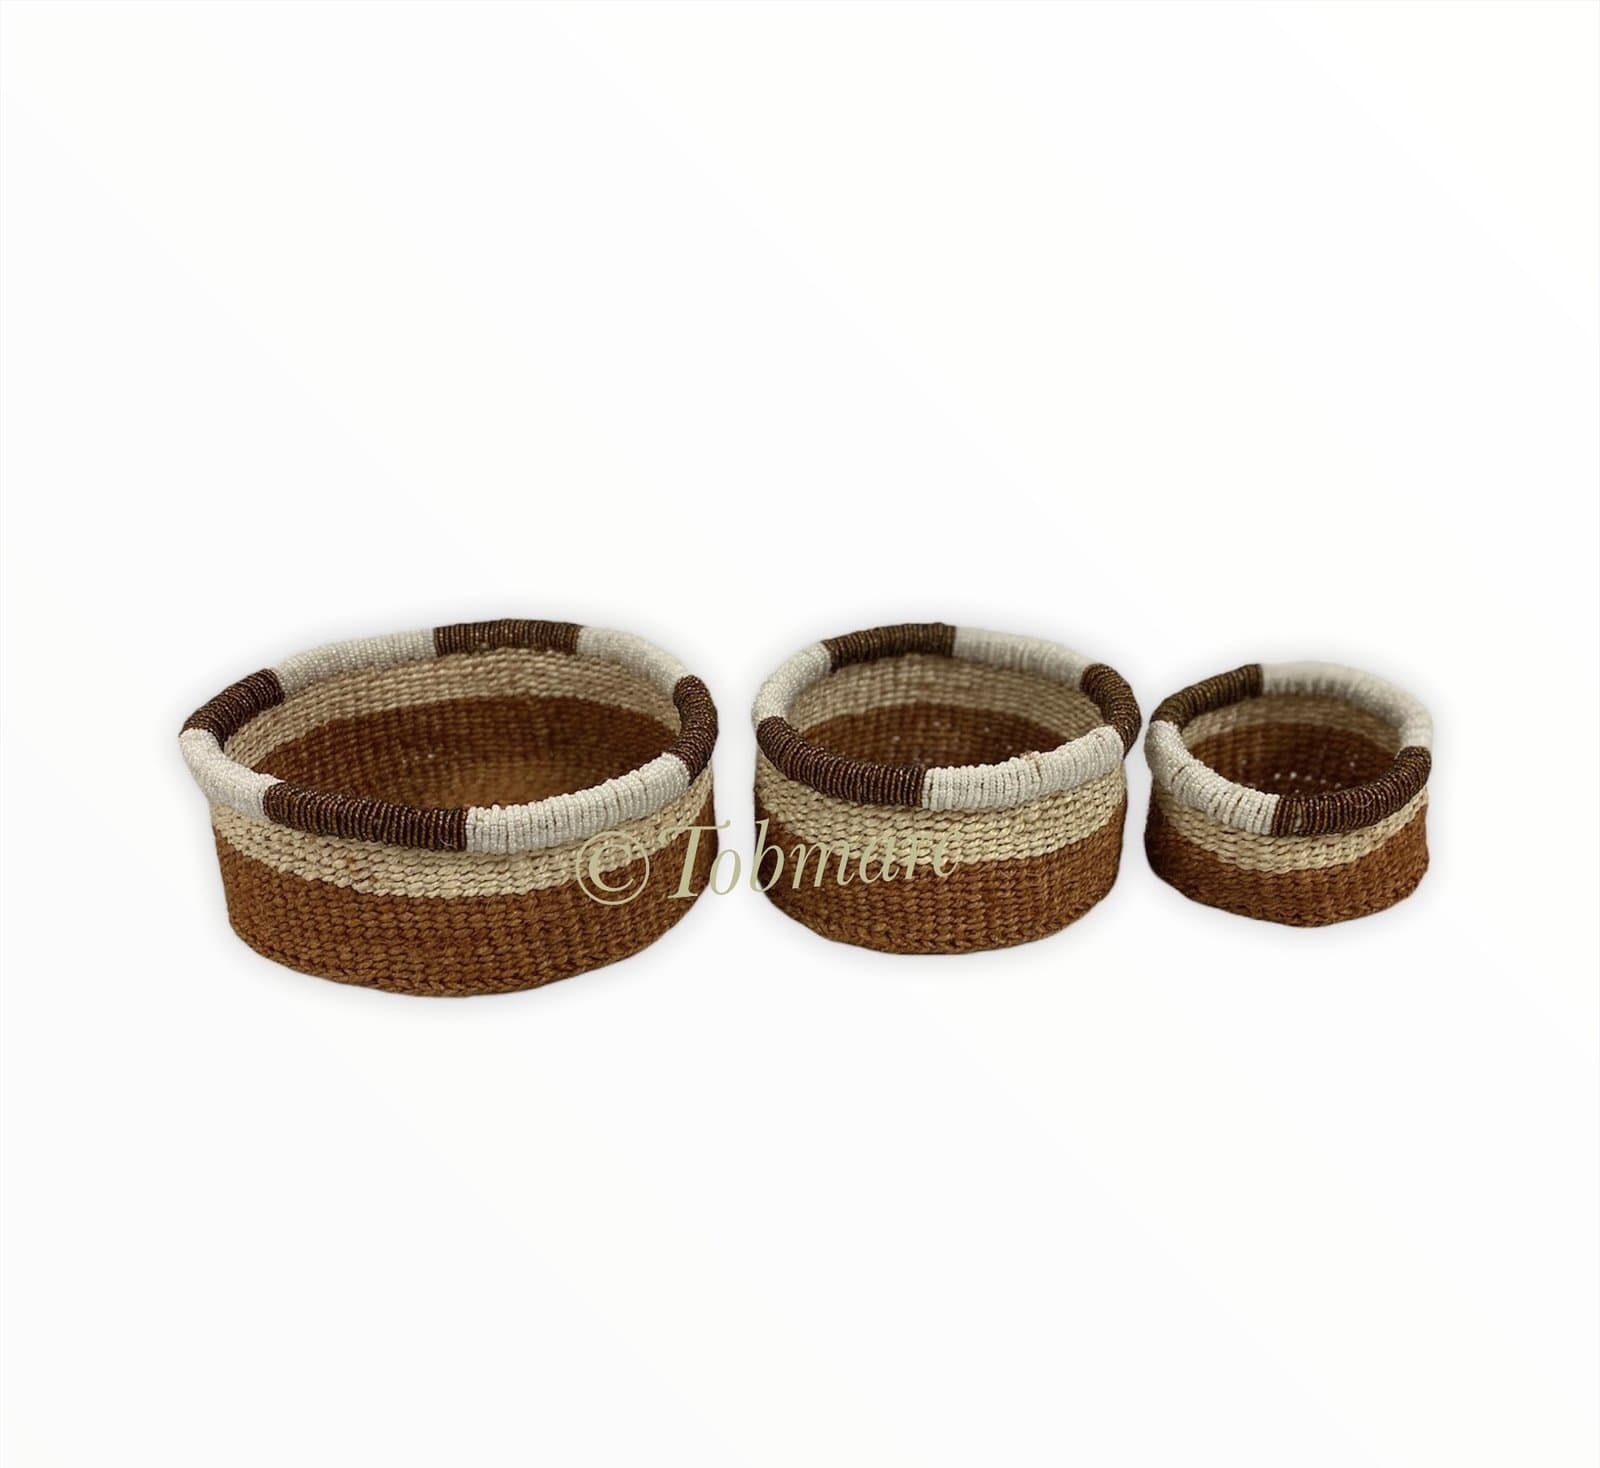 Tobmarc Home Decor & Gifts  Twin baskety